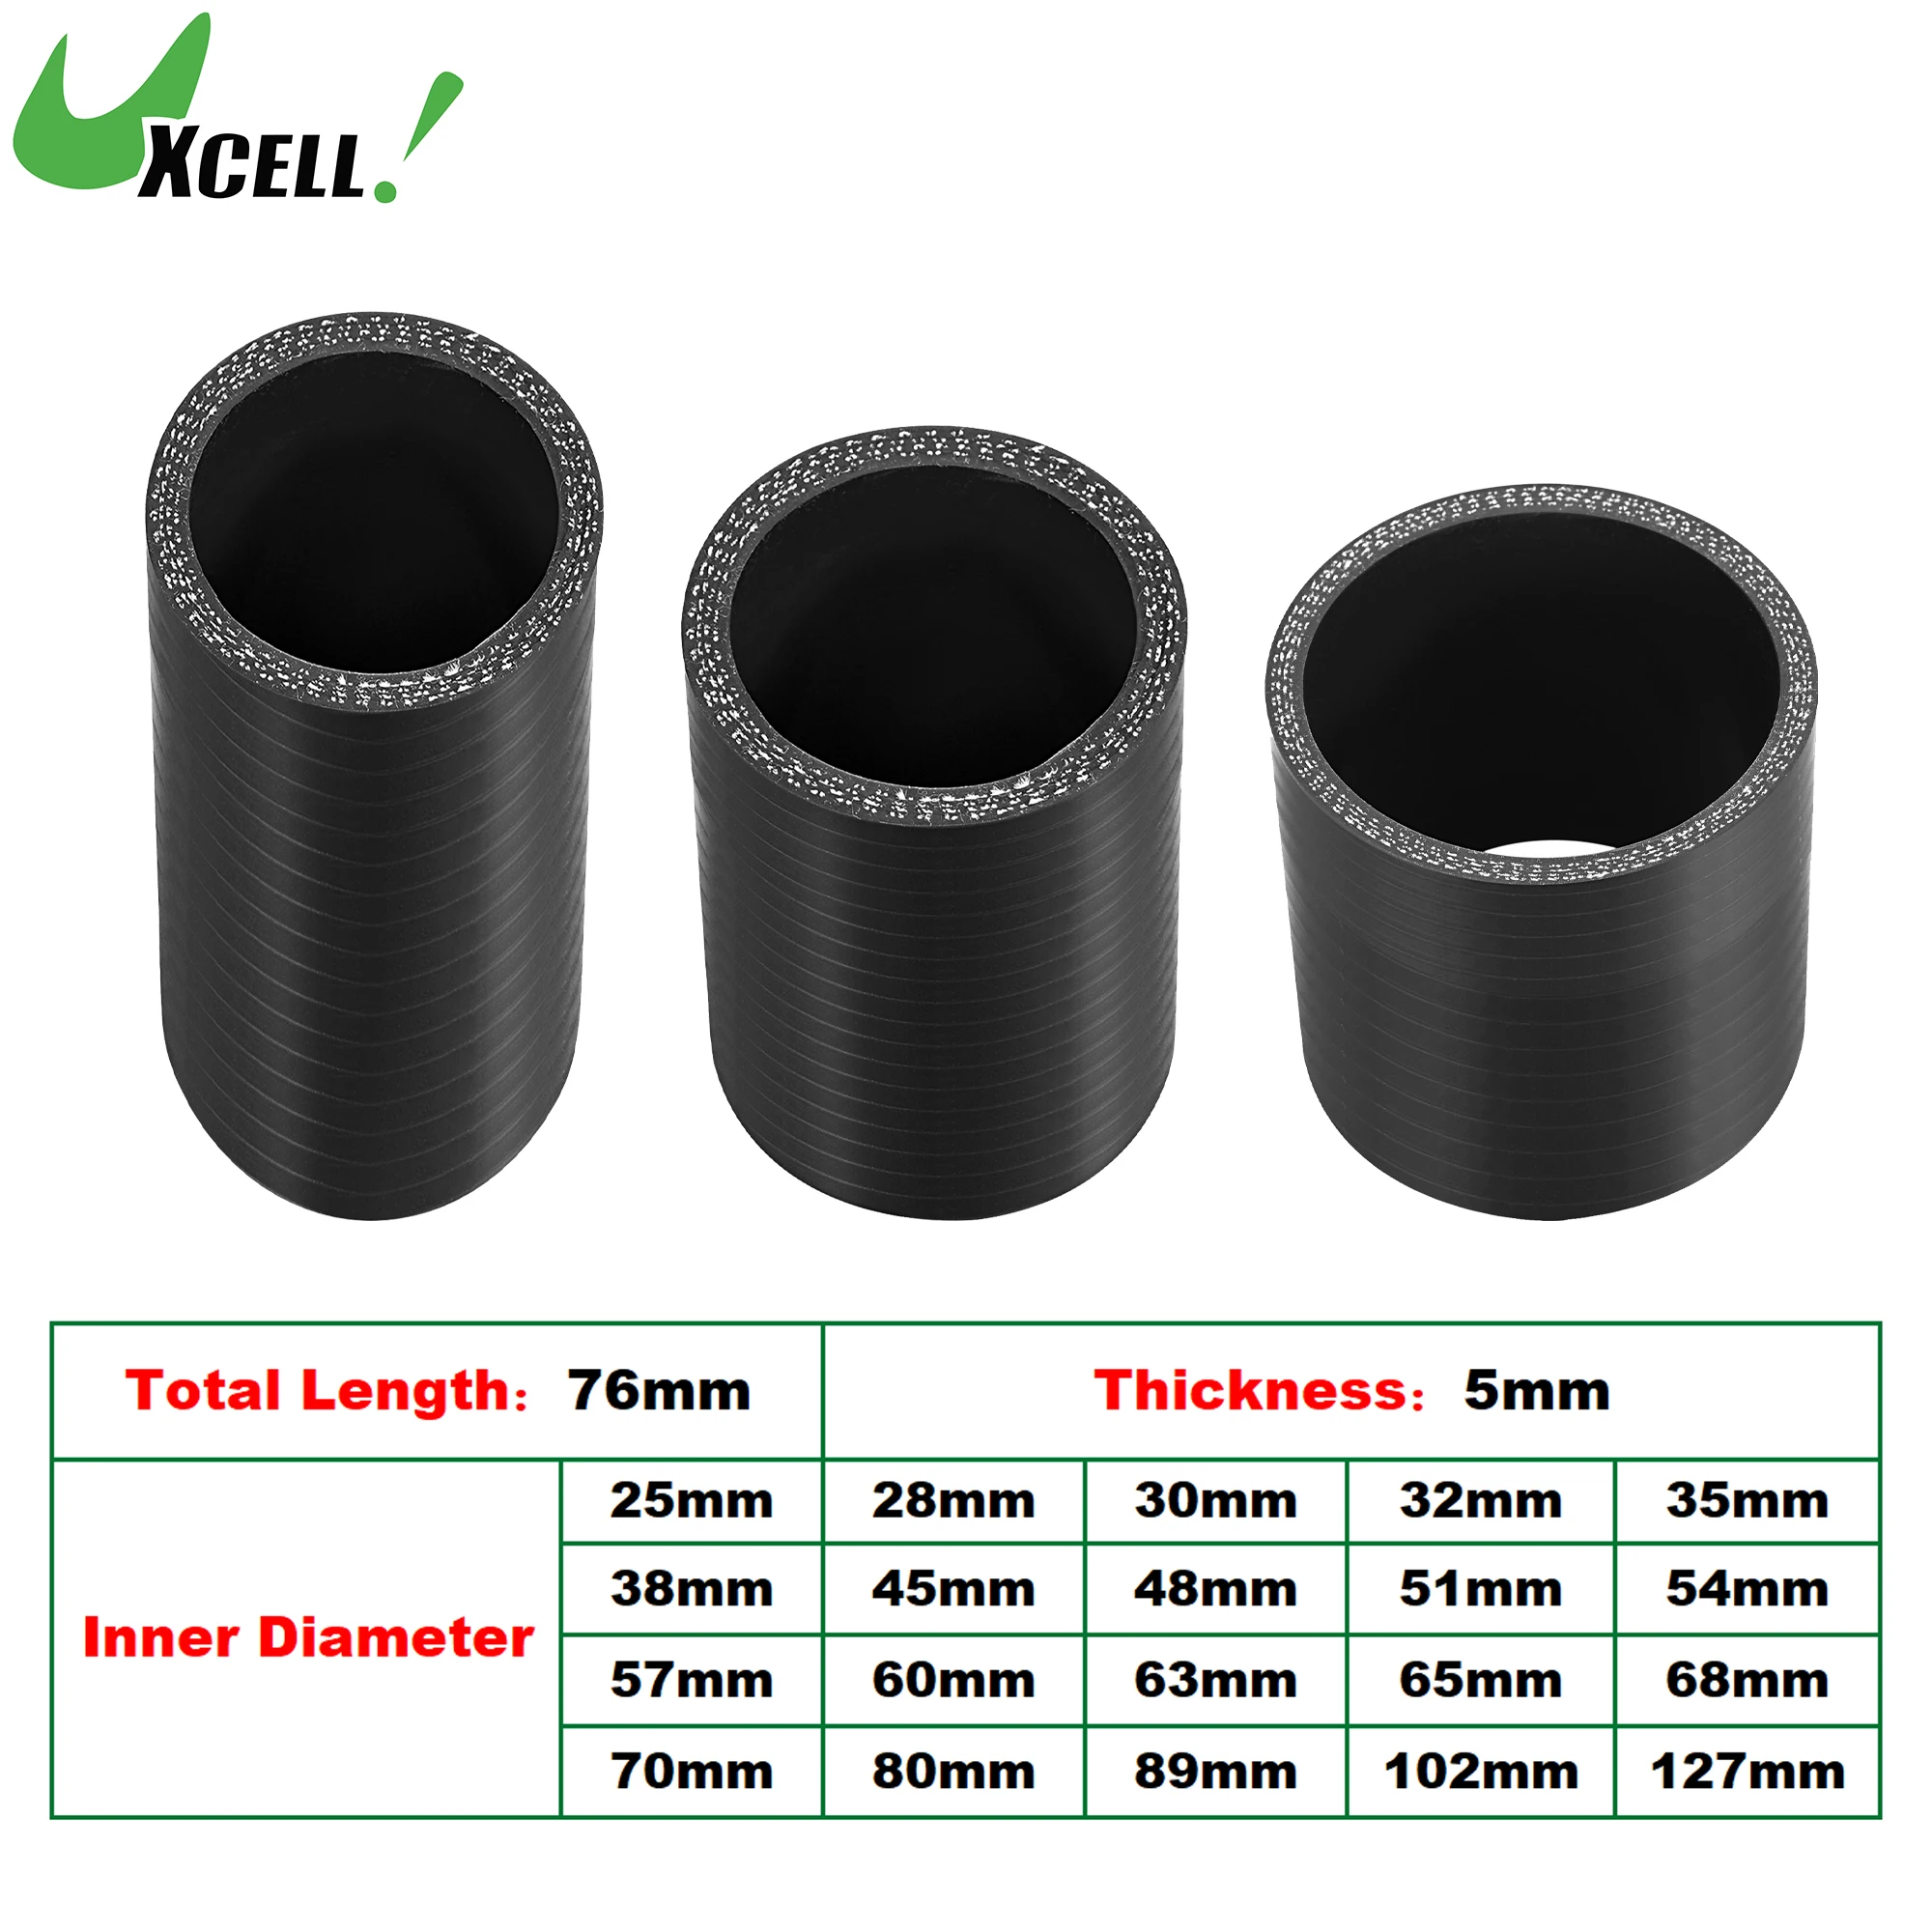 

UXCELL 25mm-127mm ID High Performance Straight Silicone Coupler Pipe Reinforced Straight Hose Turbo Intake Pipe Black